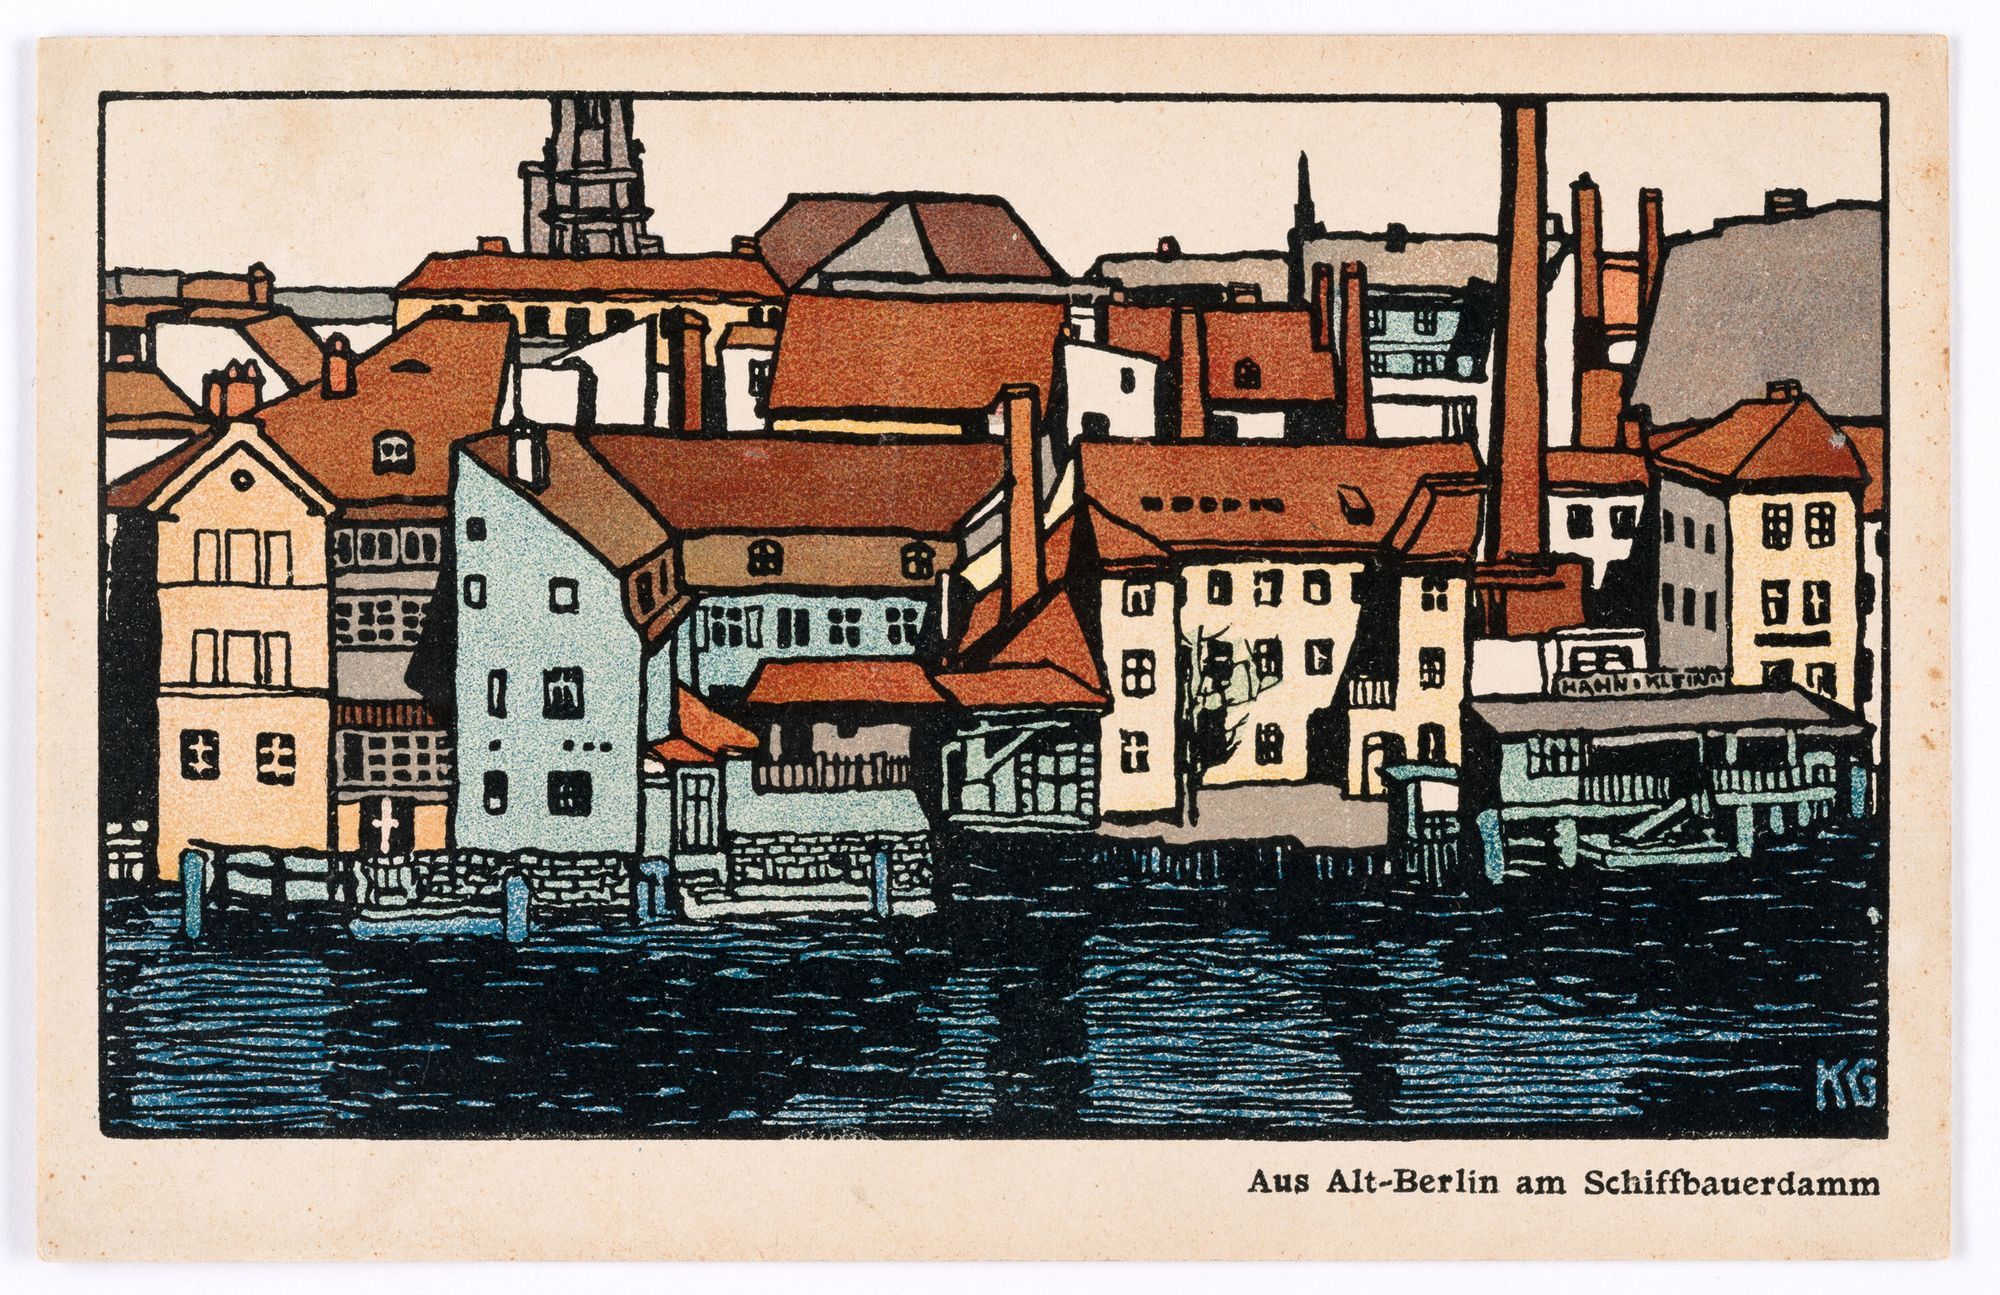 Turn-of-century Berlin and more on cheerful Art Nouveau postcards